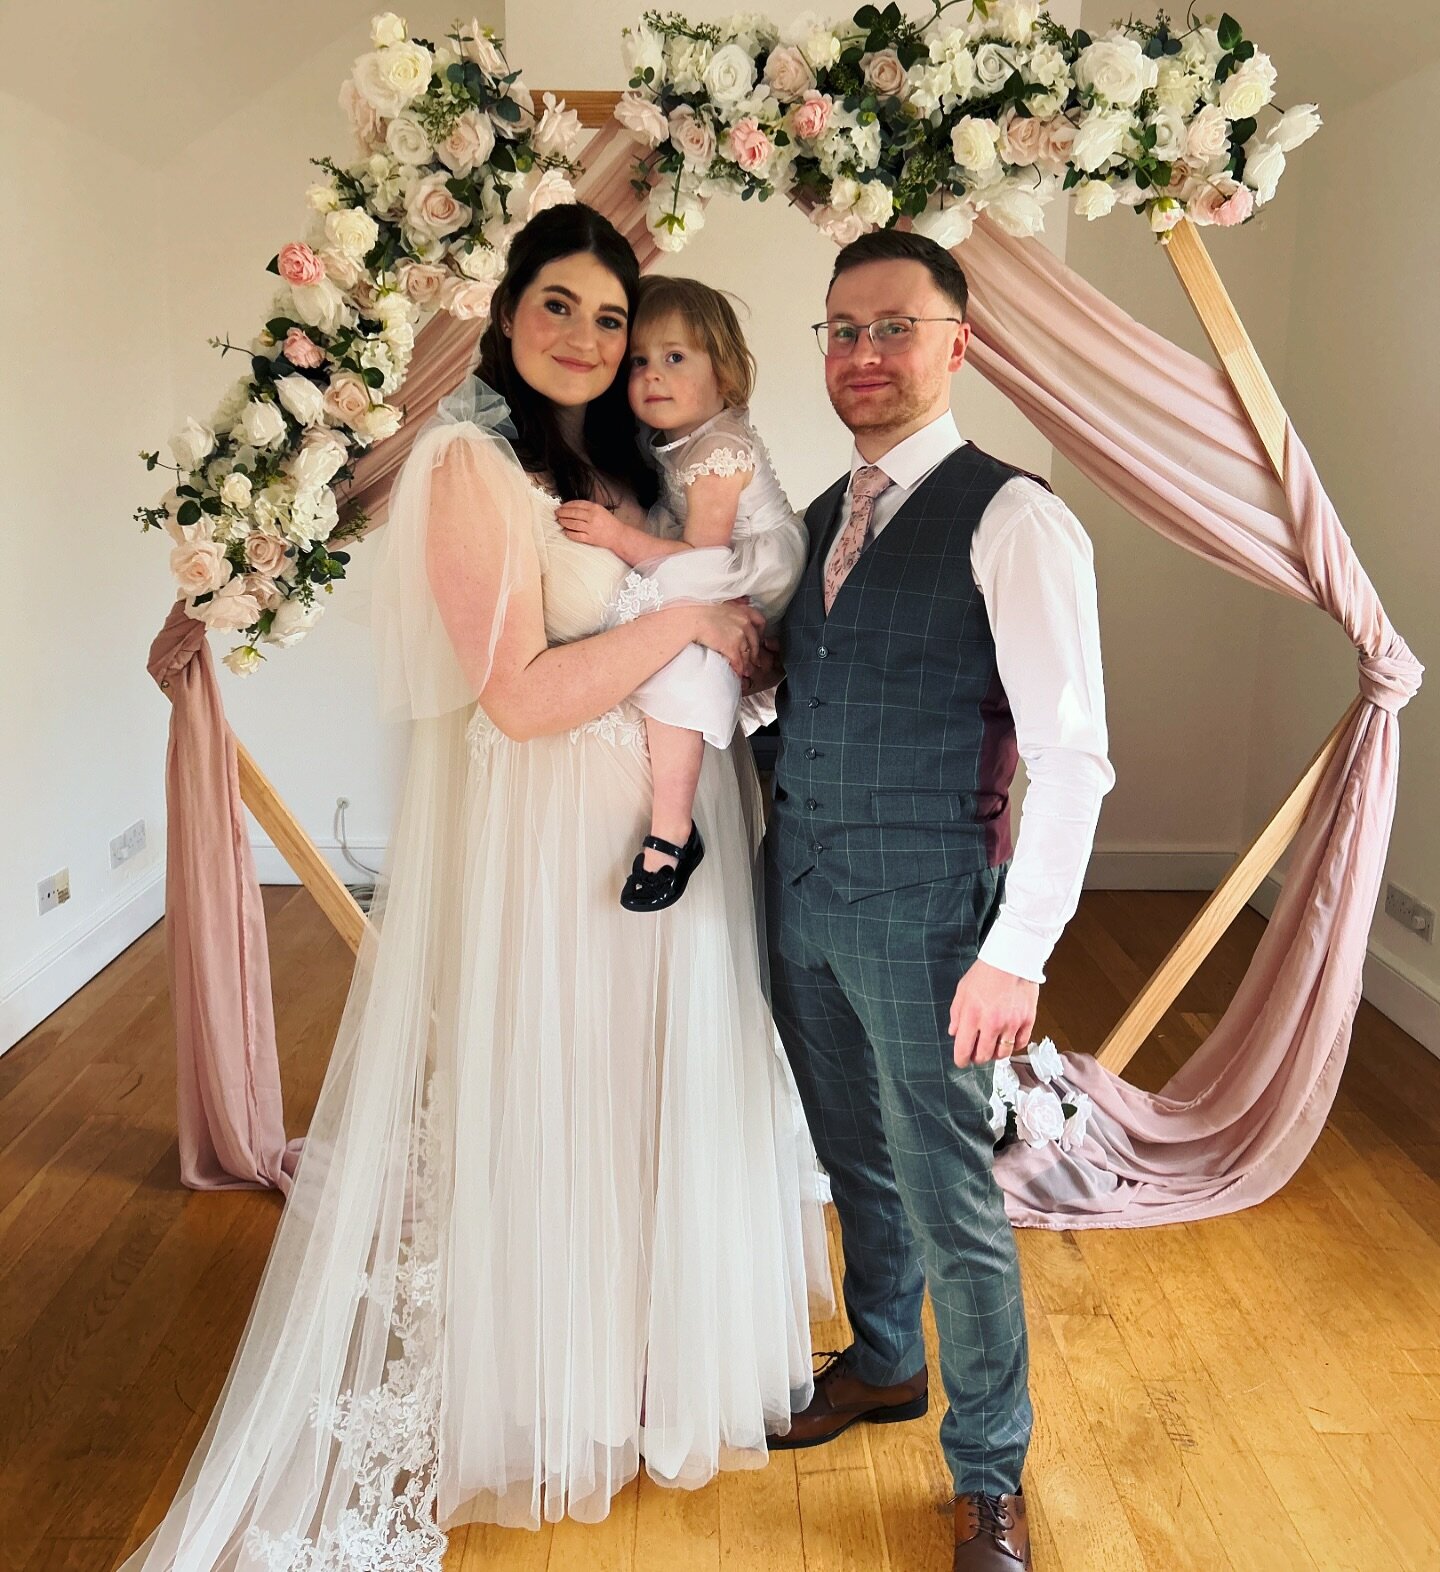 Massive congratulations to Alex &amp; Josh, beautiful intimate wedding @twyning_park This is what the lovely bride had to say - &ldquo;the meal was quite literally the best food I&rsquo;ve ever tasted! There were zero faults at all!! We were so happy